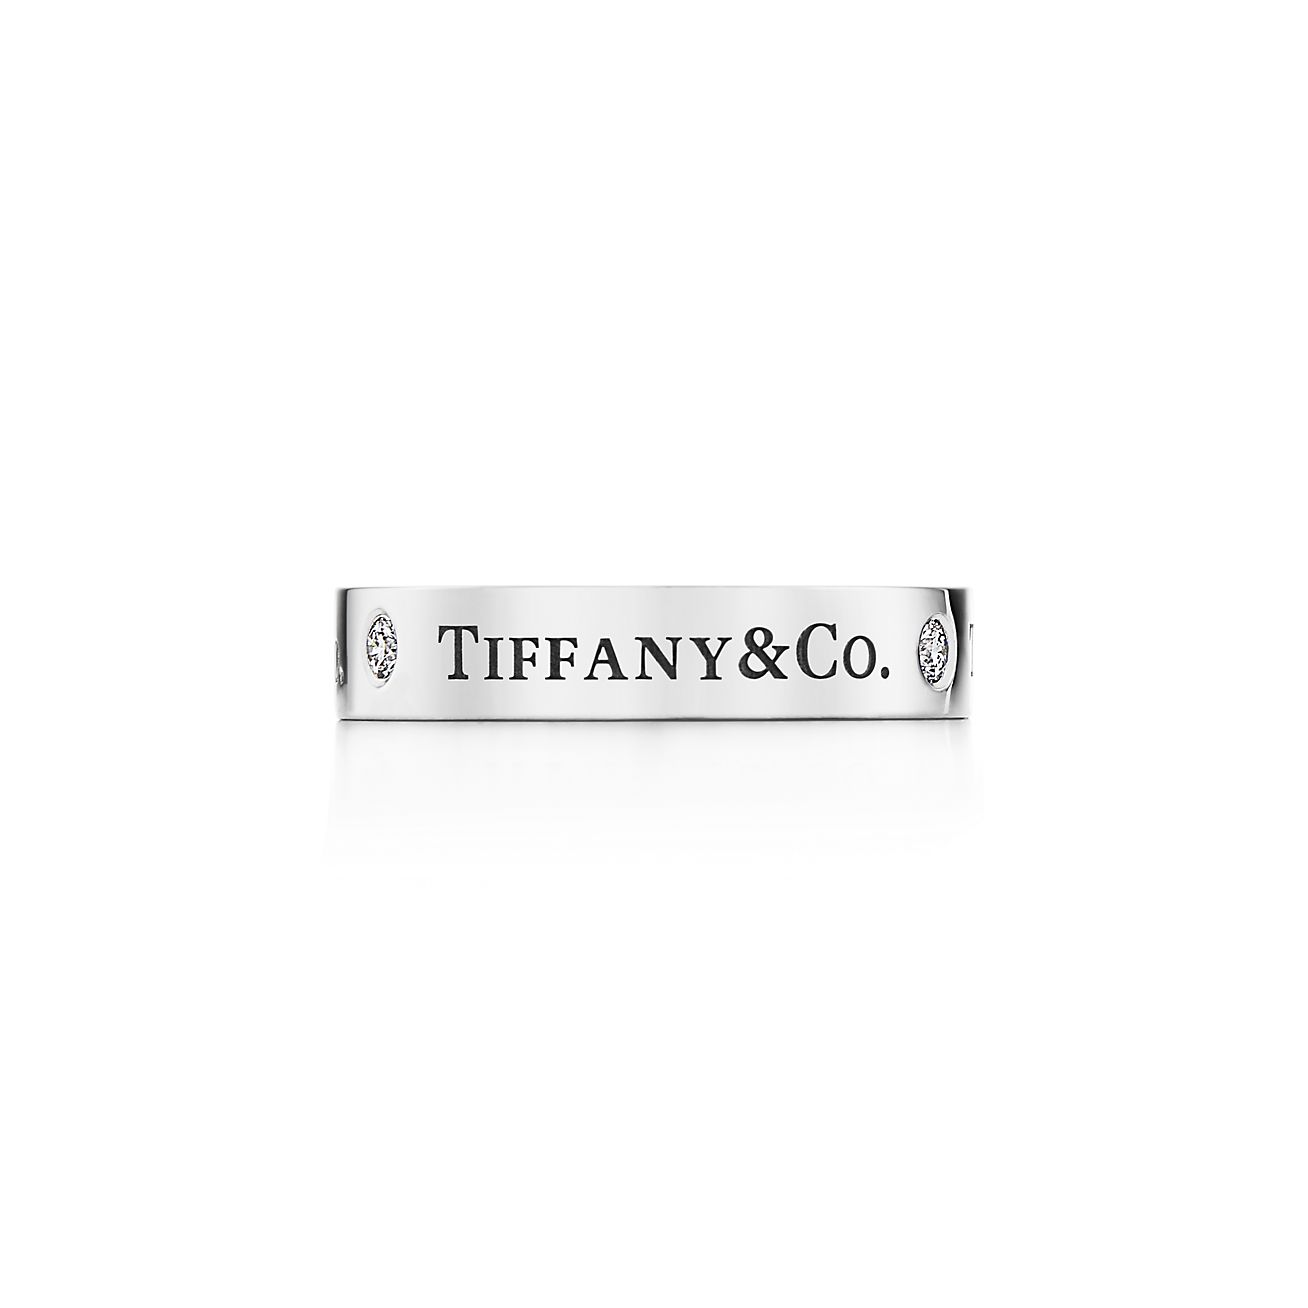 Tiffany & Co.® Band Ring In Platinum With Diamonds, 4 Mm. | Tiffany & Co.